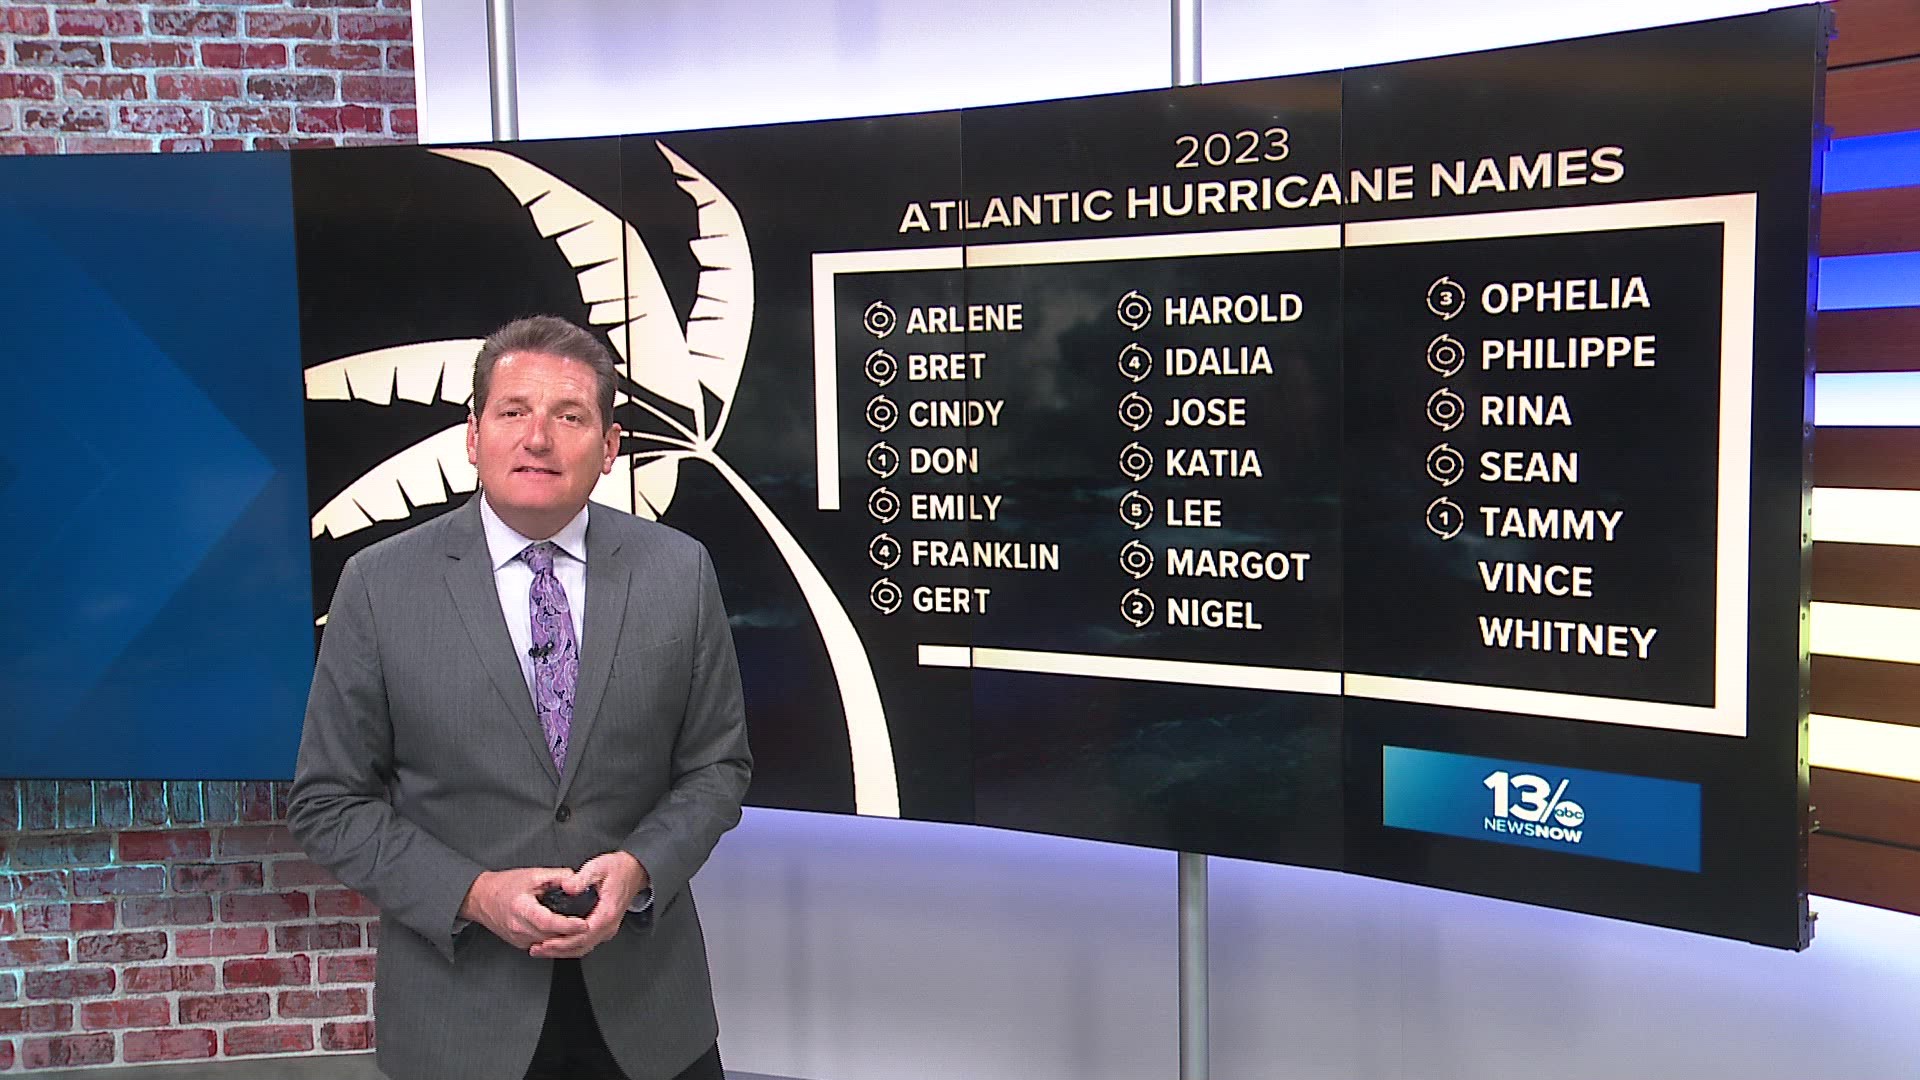 In terms of the most named storms in a year, the 2023 Atlantic hurricane season, which officially ends on Thursday, is ranked fourth since 1950.